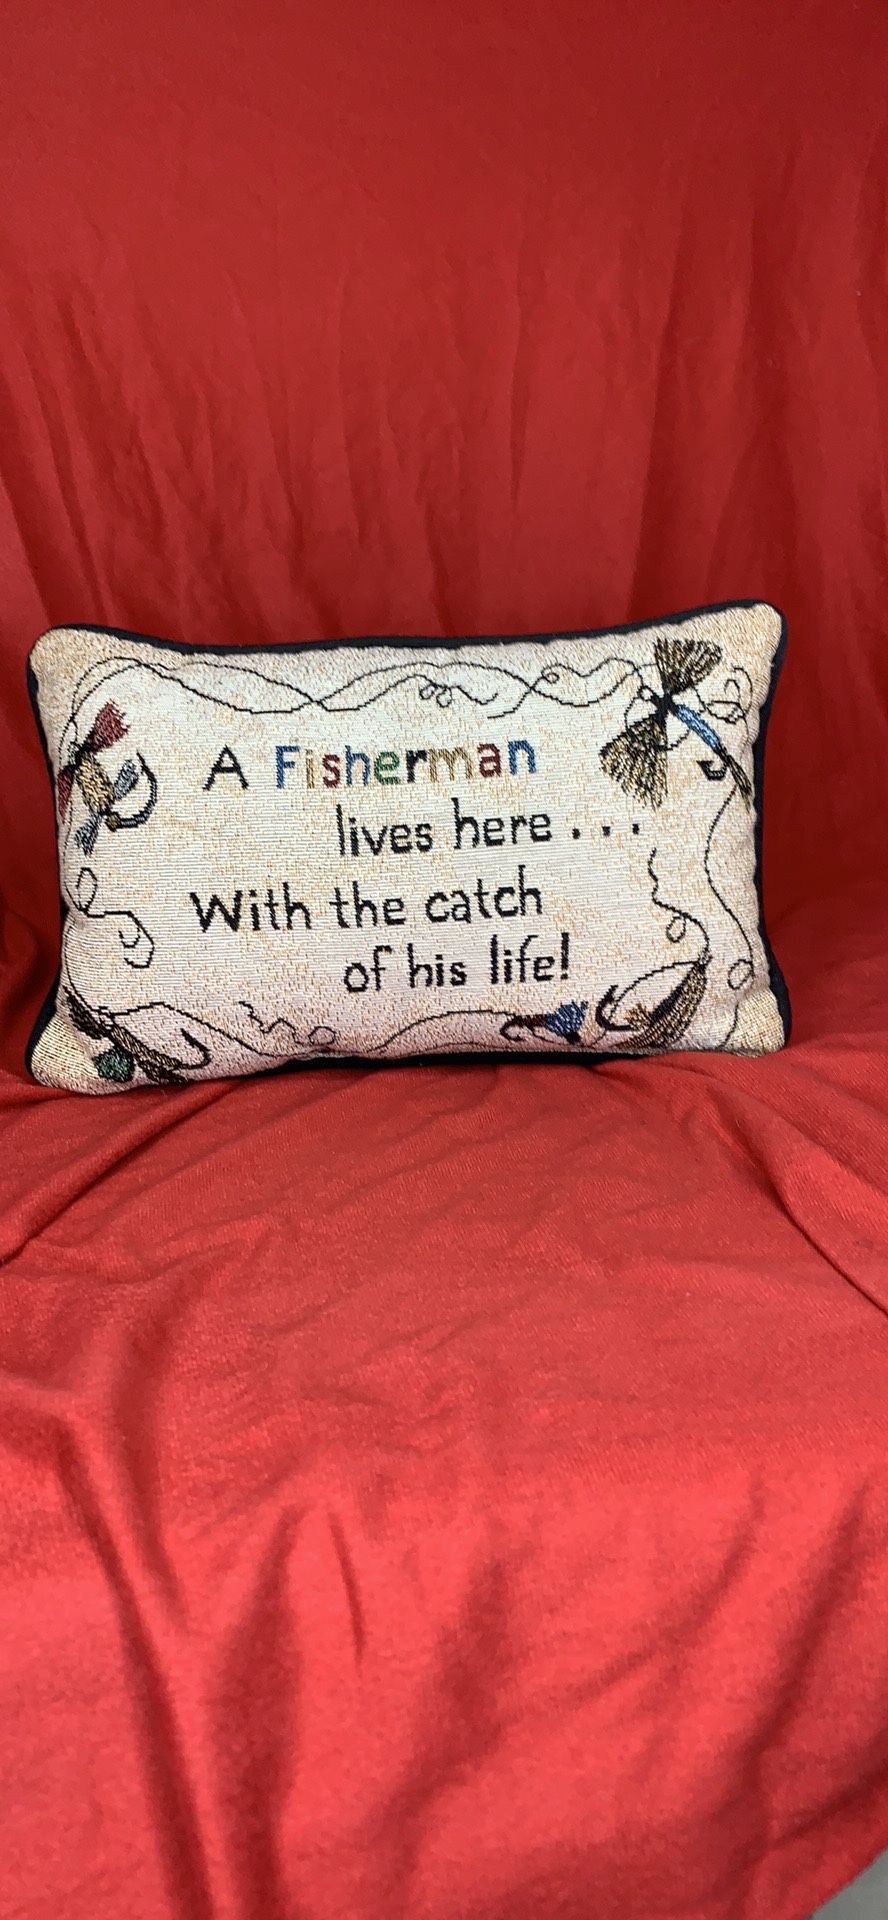 Brand New Pillow A Fisherman lives here... With the catch of his life